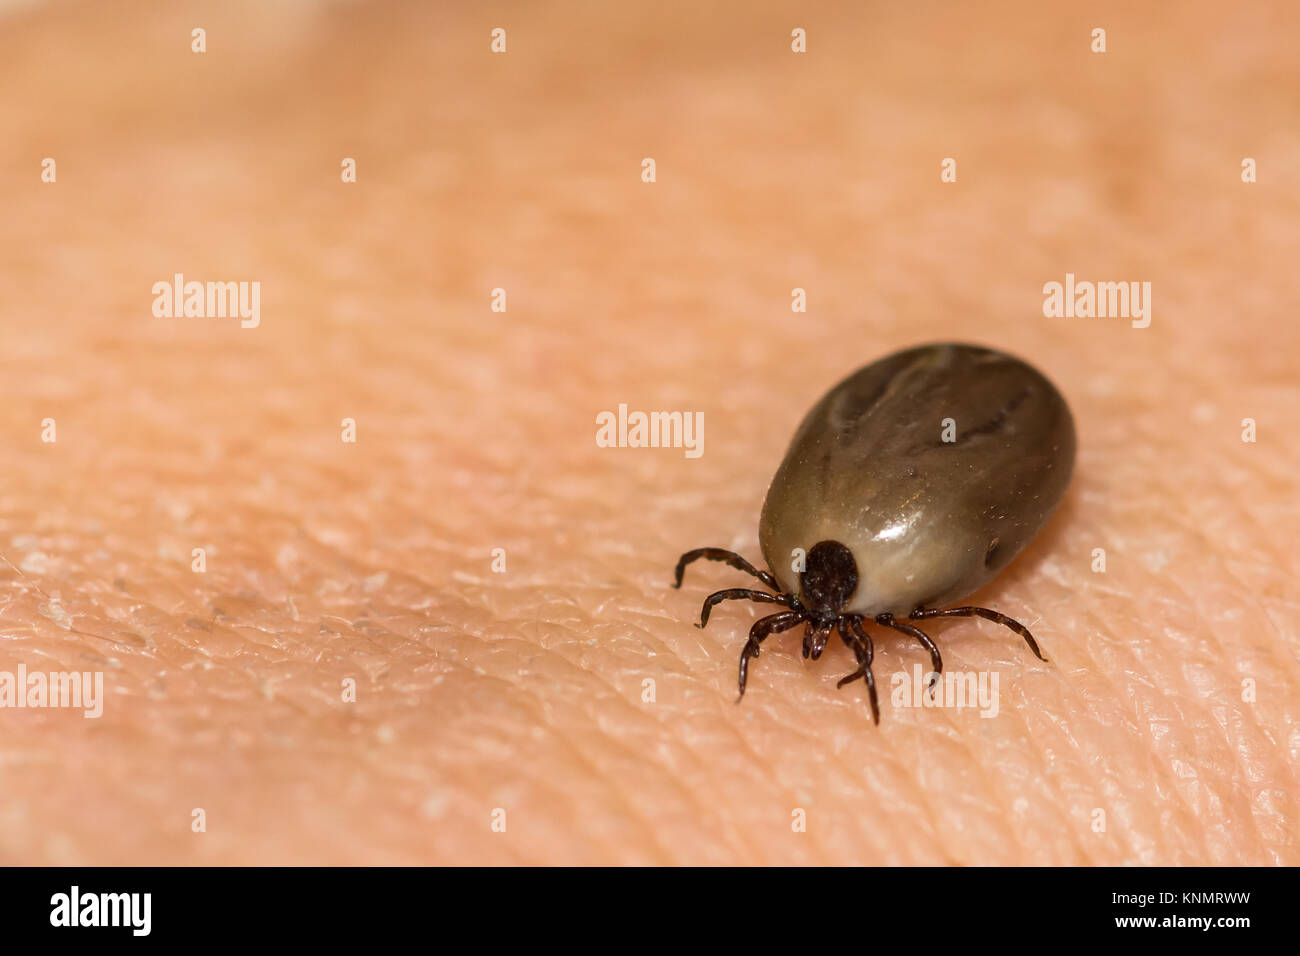 An engorged female Deer Tick removed from an accidental host. Stock Photo